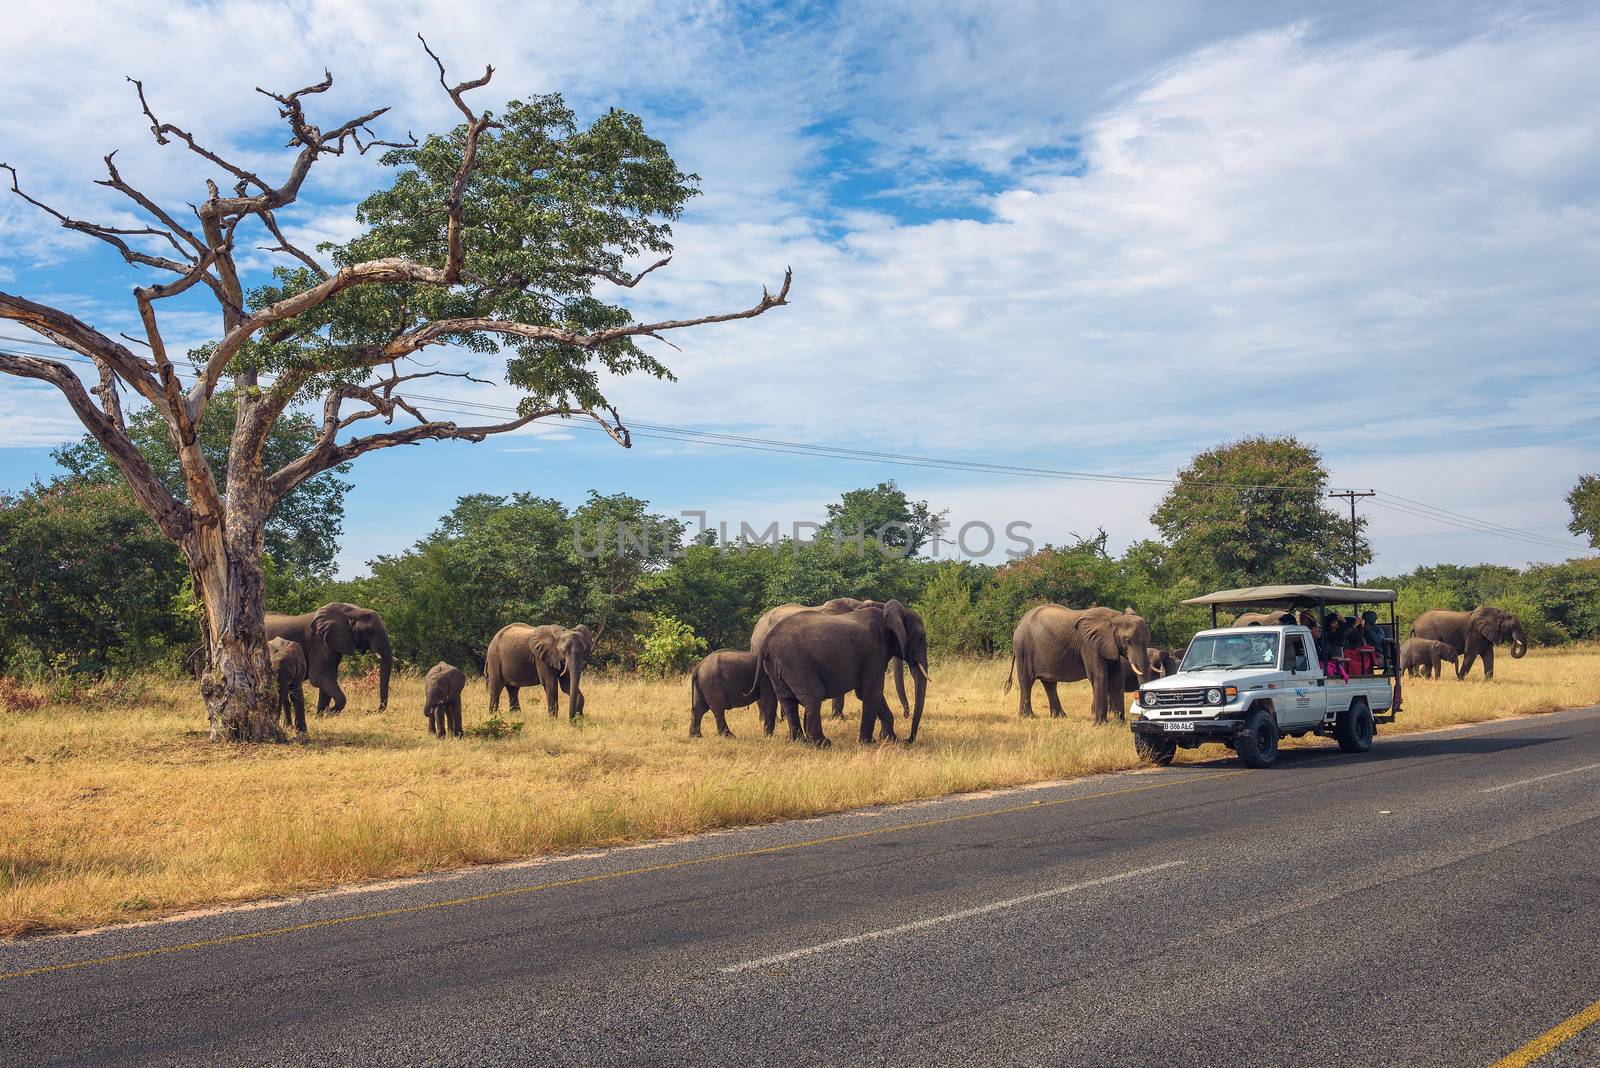 Kasane, Botswana - April 8, 2019 : Herd of elephants crossing the road around a safari car with tourists in Chobe National Park